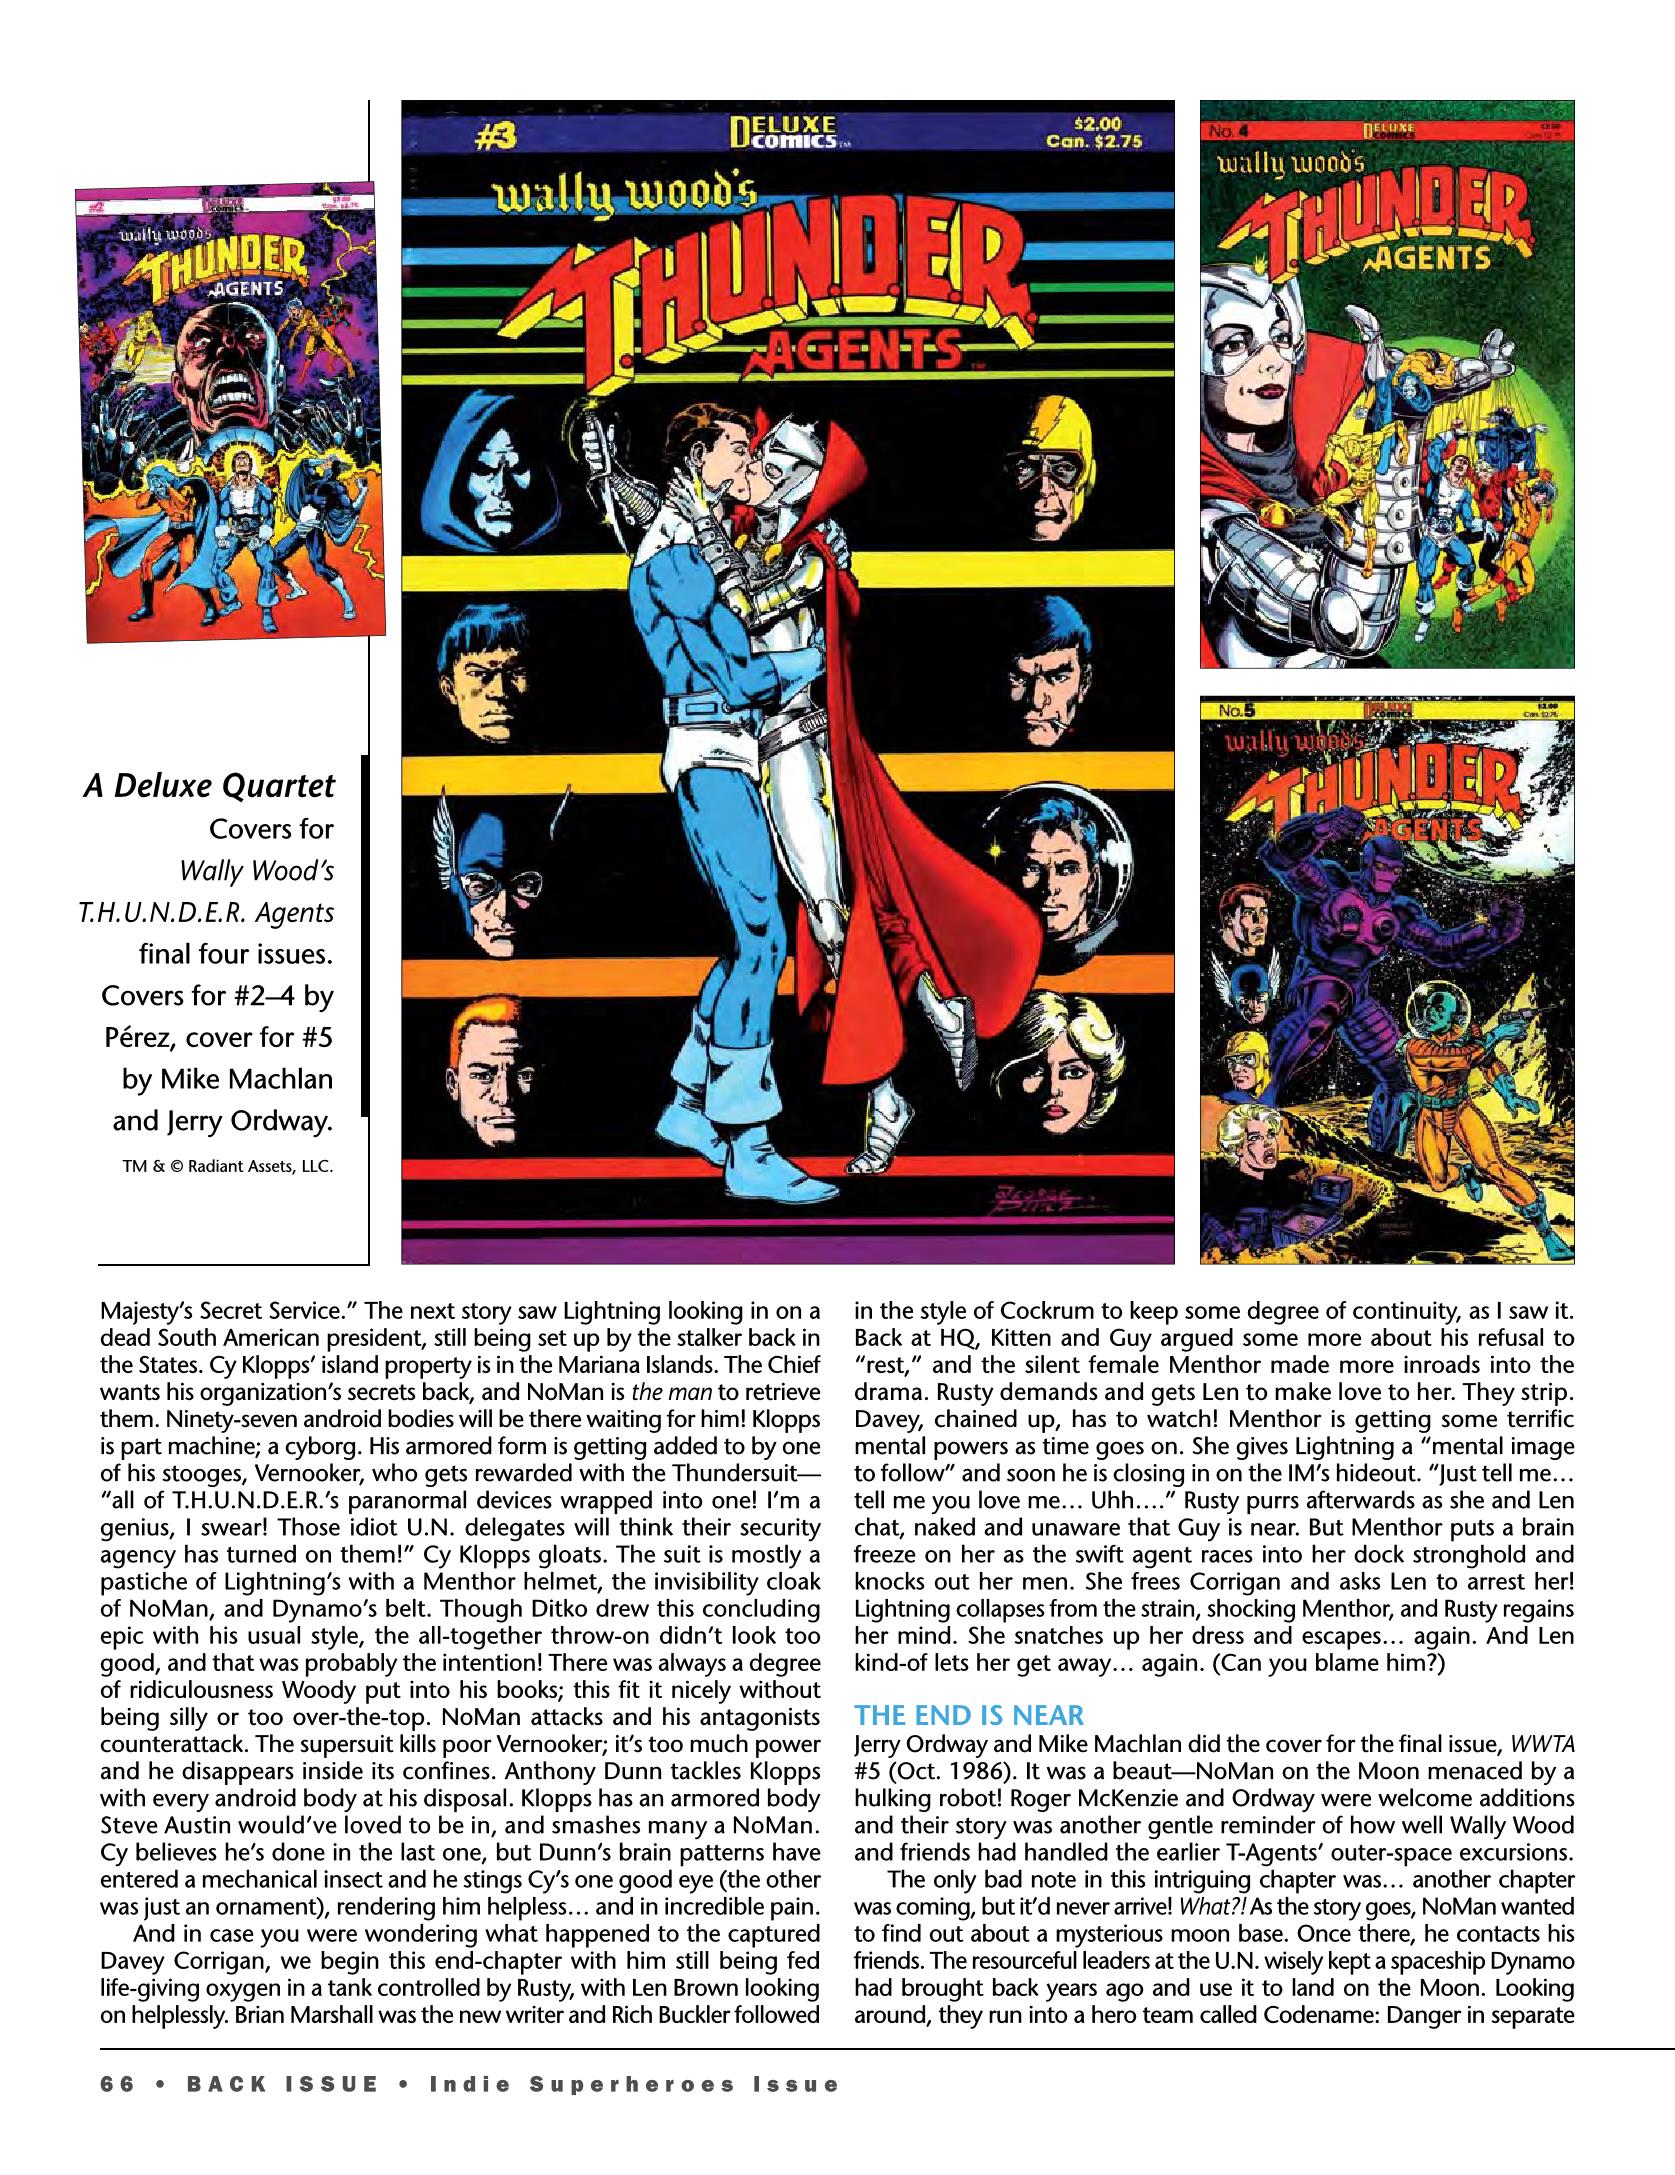 Read online Back Issue comic -  Issue #94 - 65